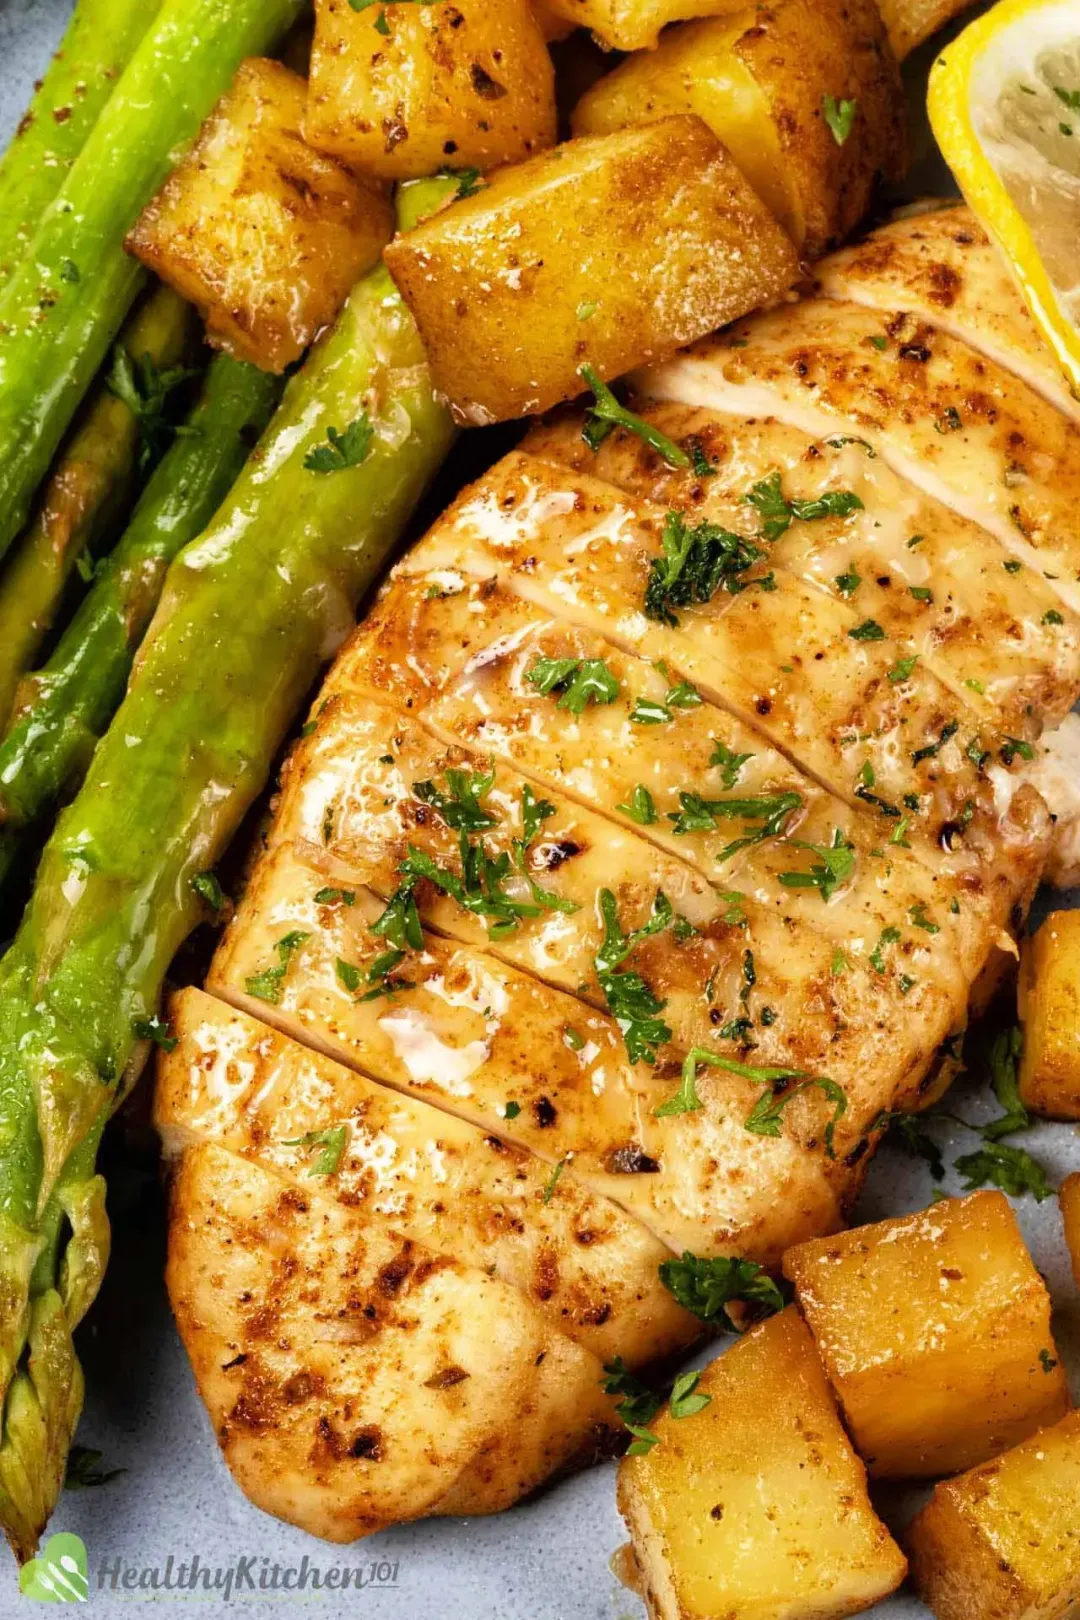 A piece of baked chicken breast surrounded by potato cubes and asparagus